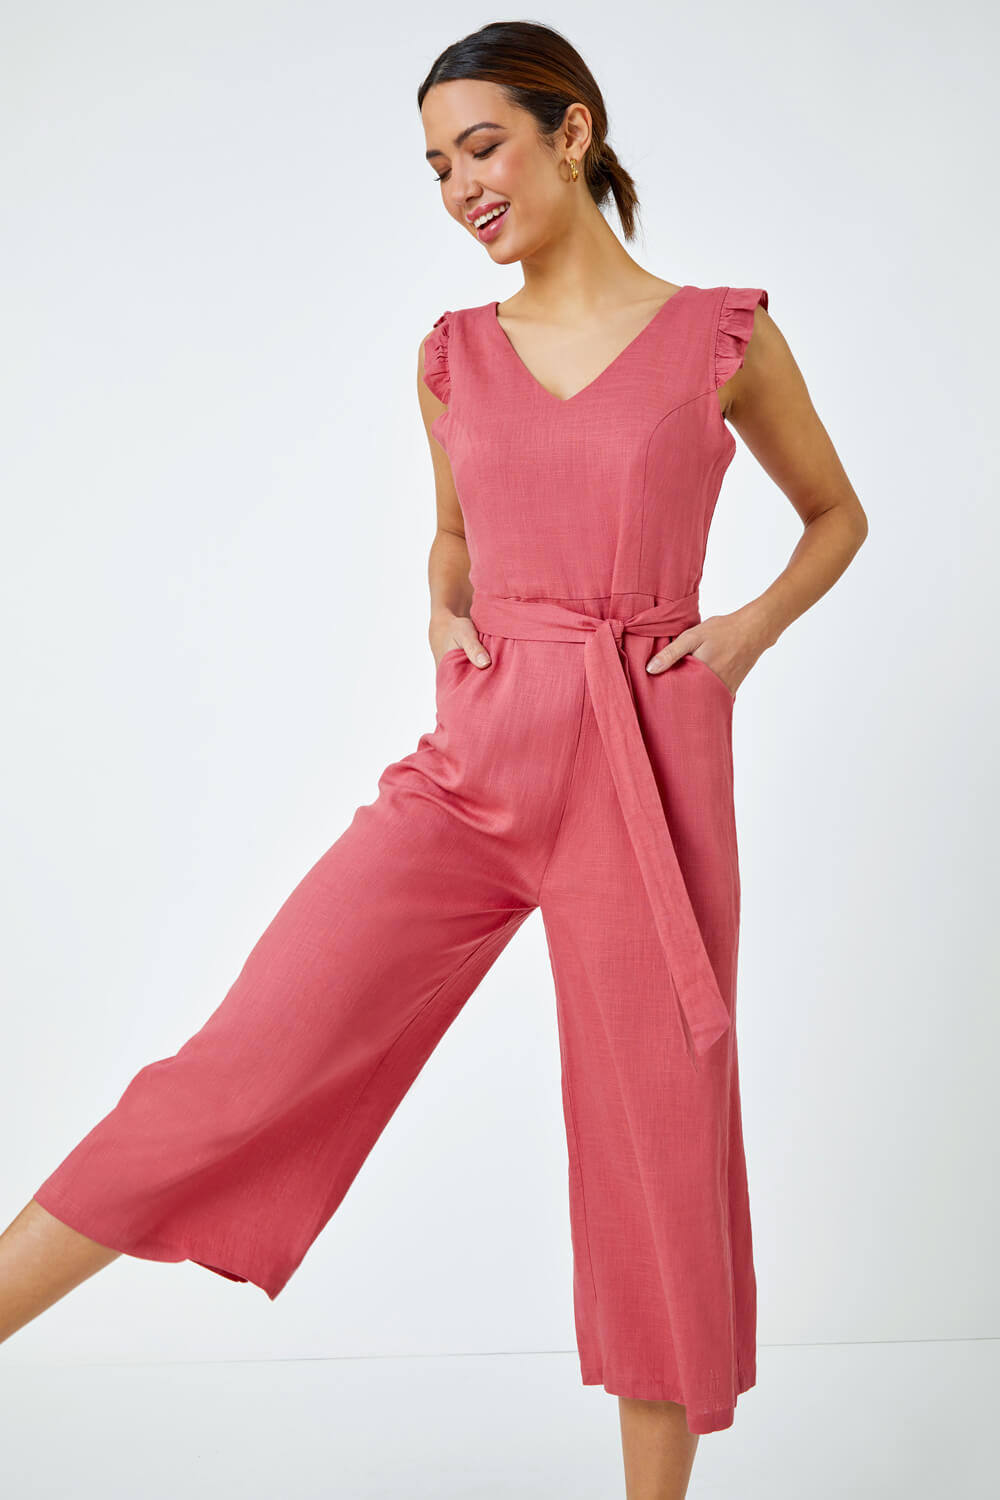 PINK Linen Blend Cropped Frill Jumpsuit, Image 2 of 5